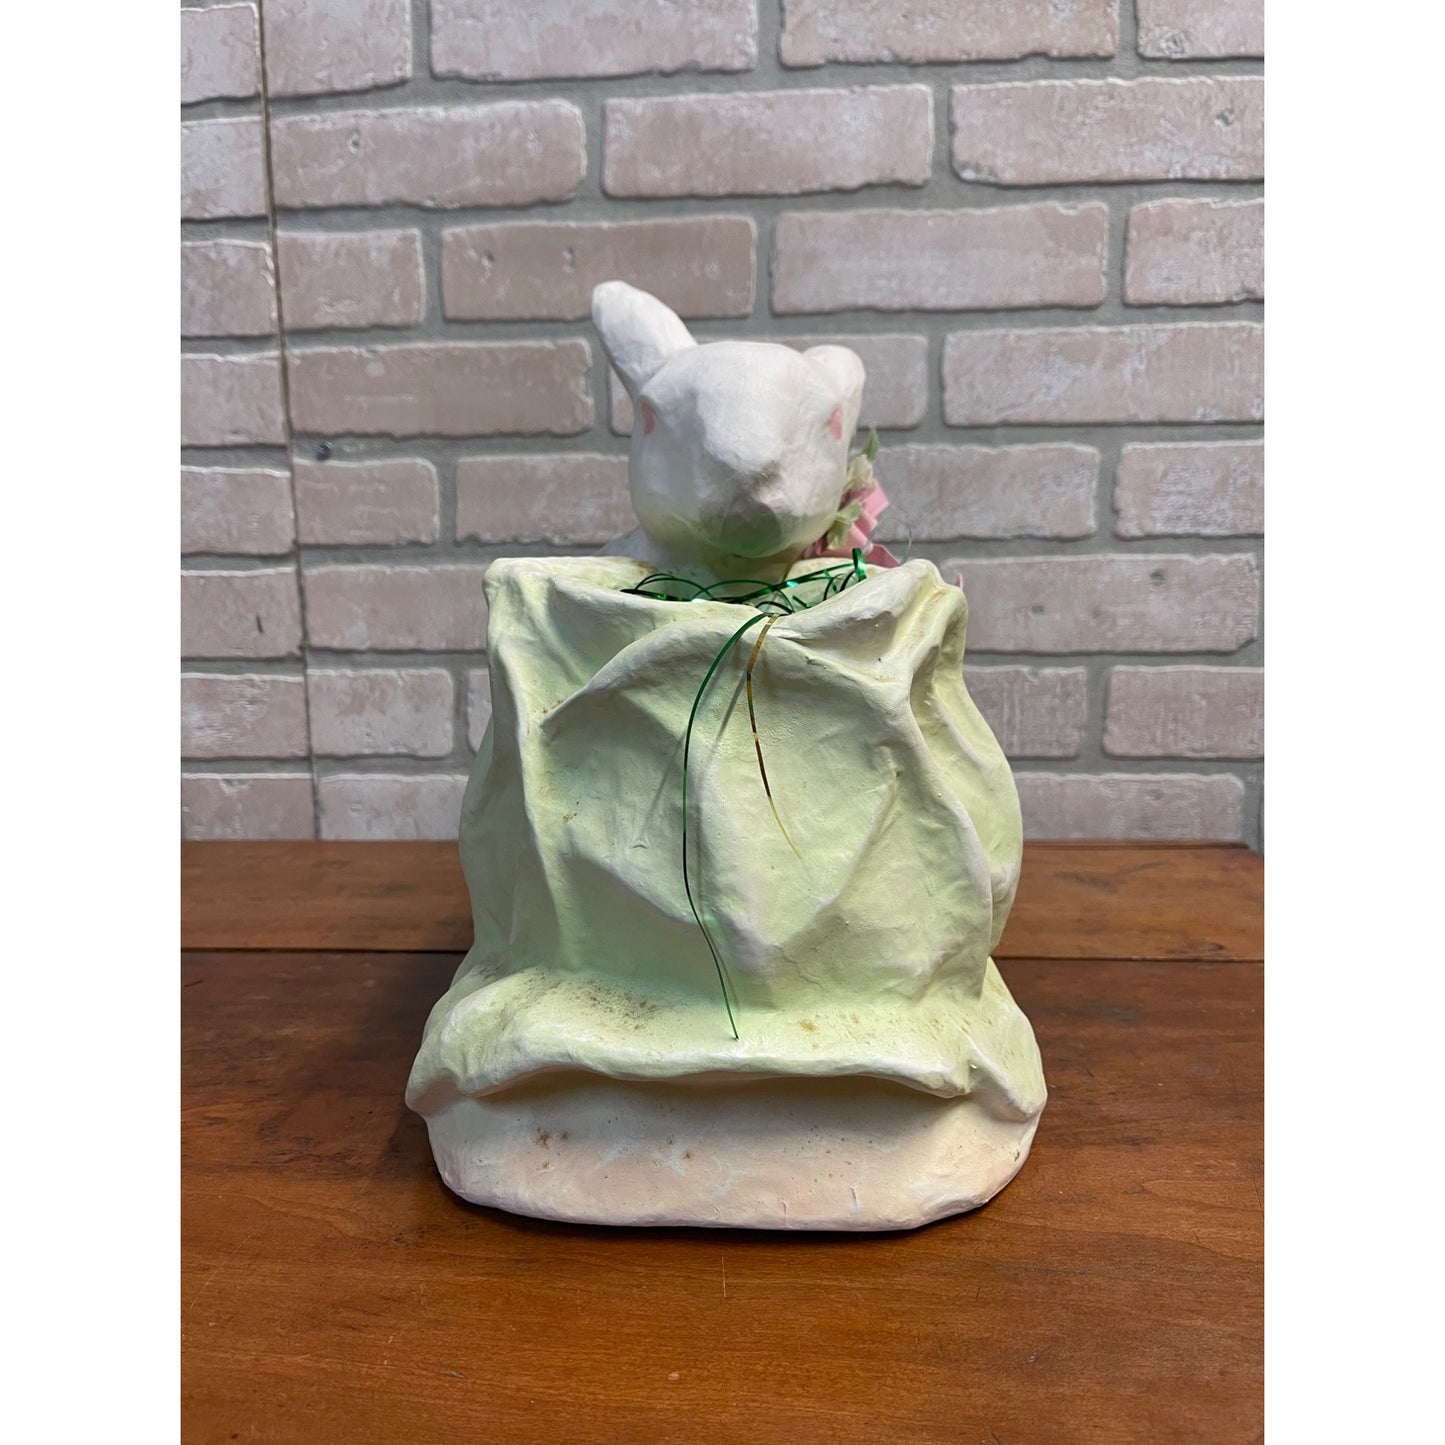 RARE Vintage Easter Bunny Store Display Paper Mache Pulp Candy Container Large 12"